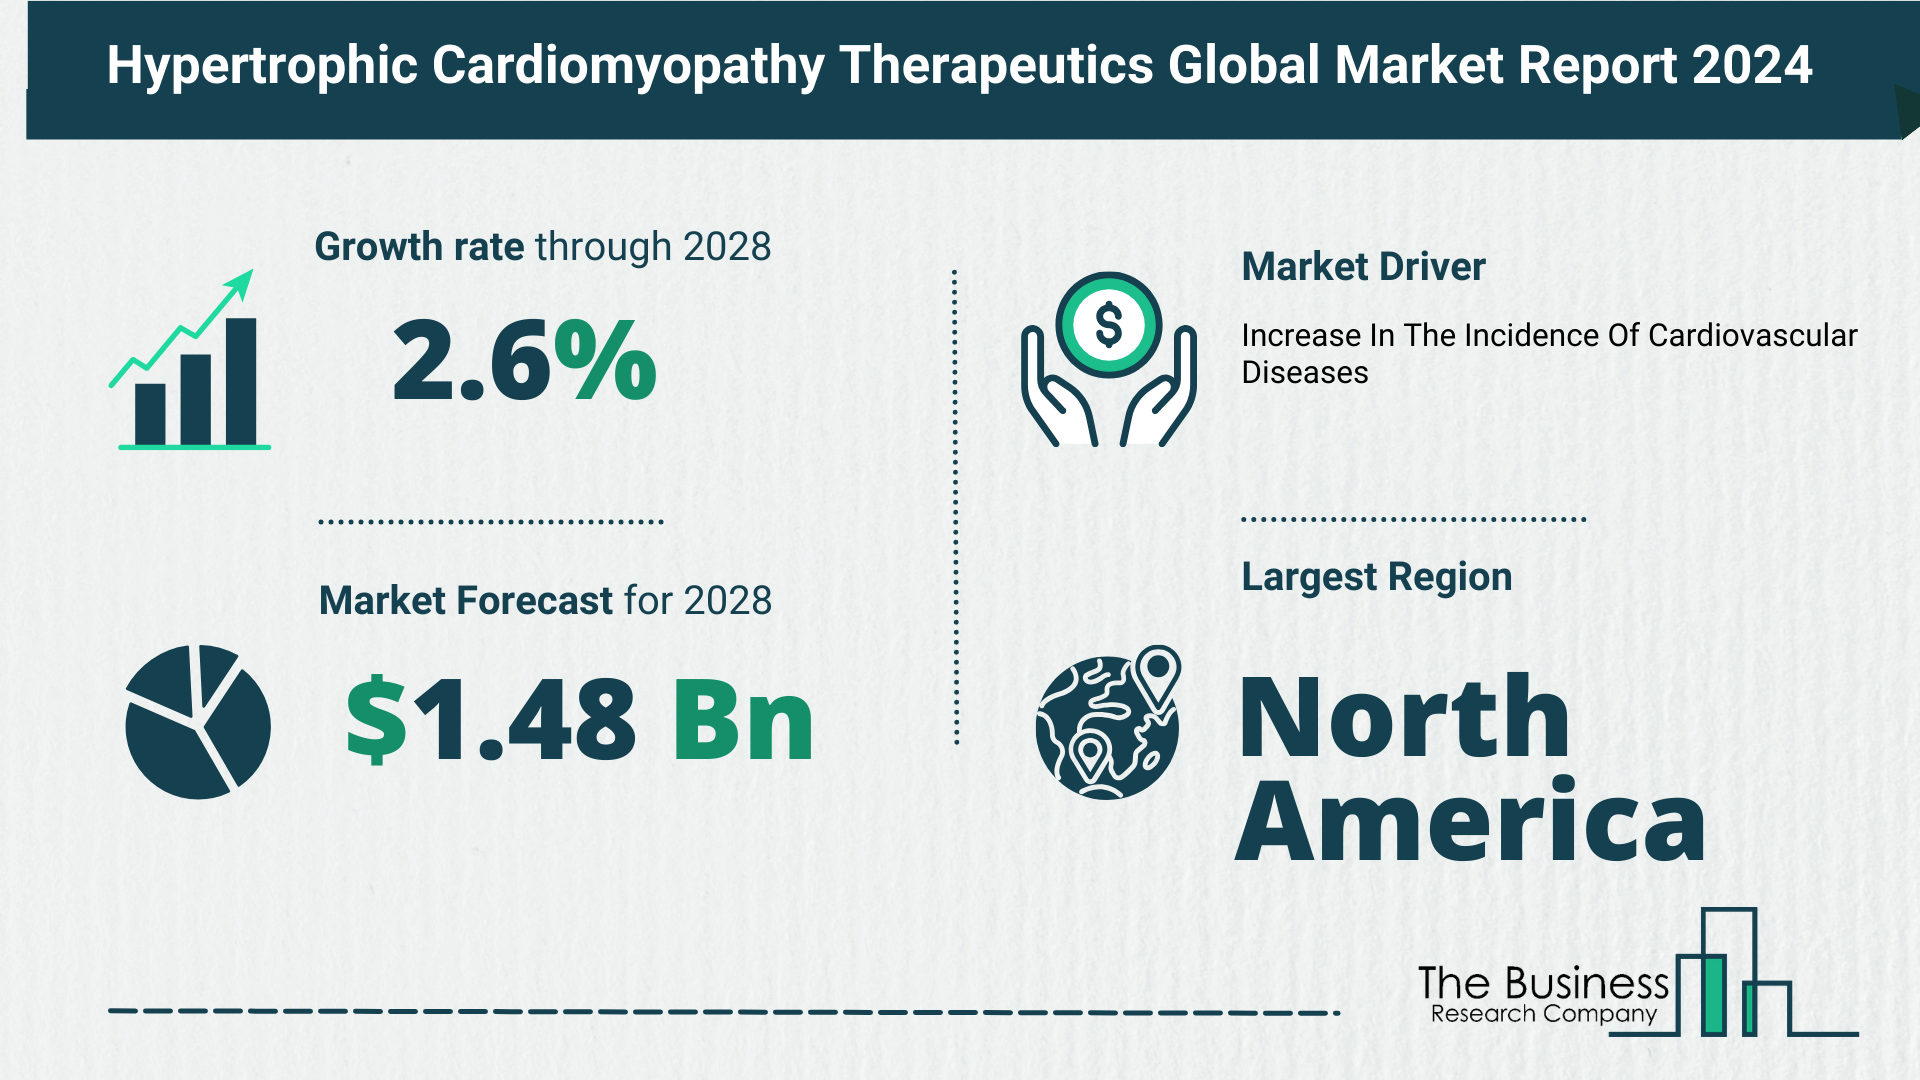 Comprehensive Analysis On Size, Share, And Drivers Of The Hypertrophic Cardiomyopathy (HCM) Therapeutics Market